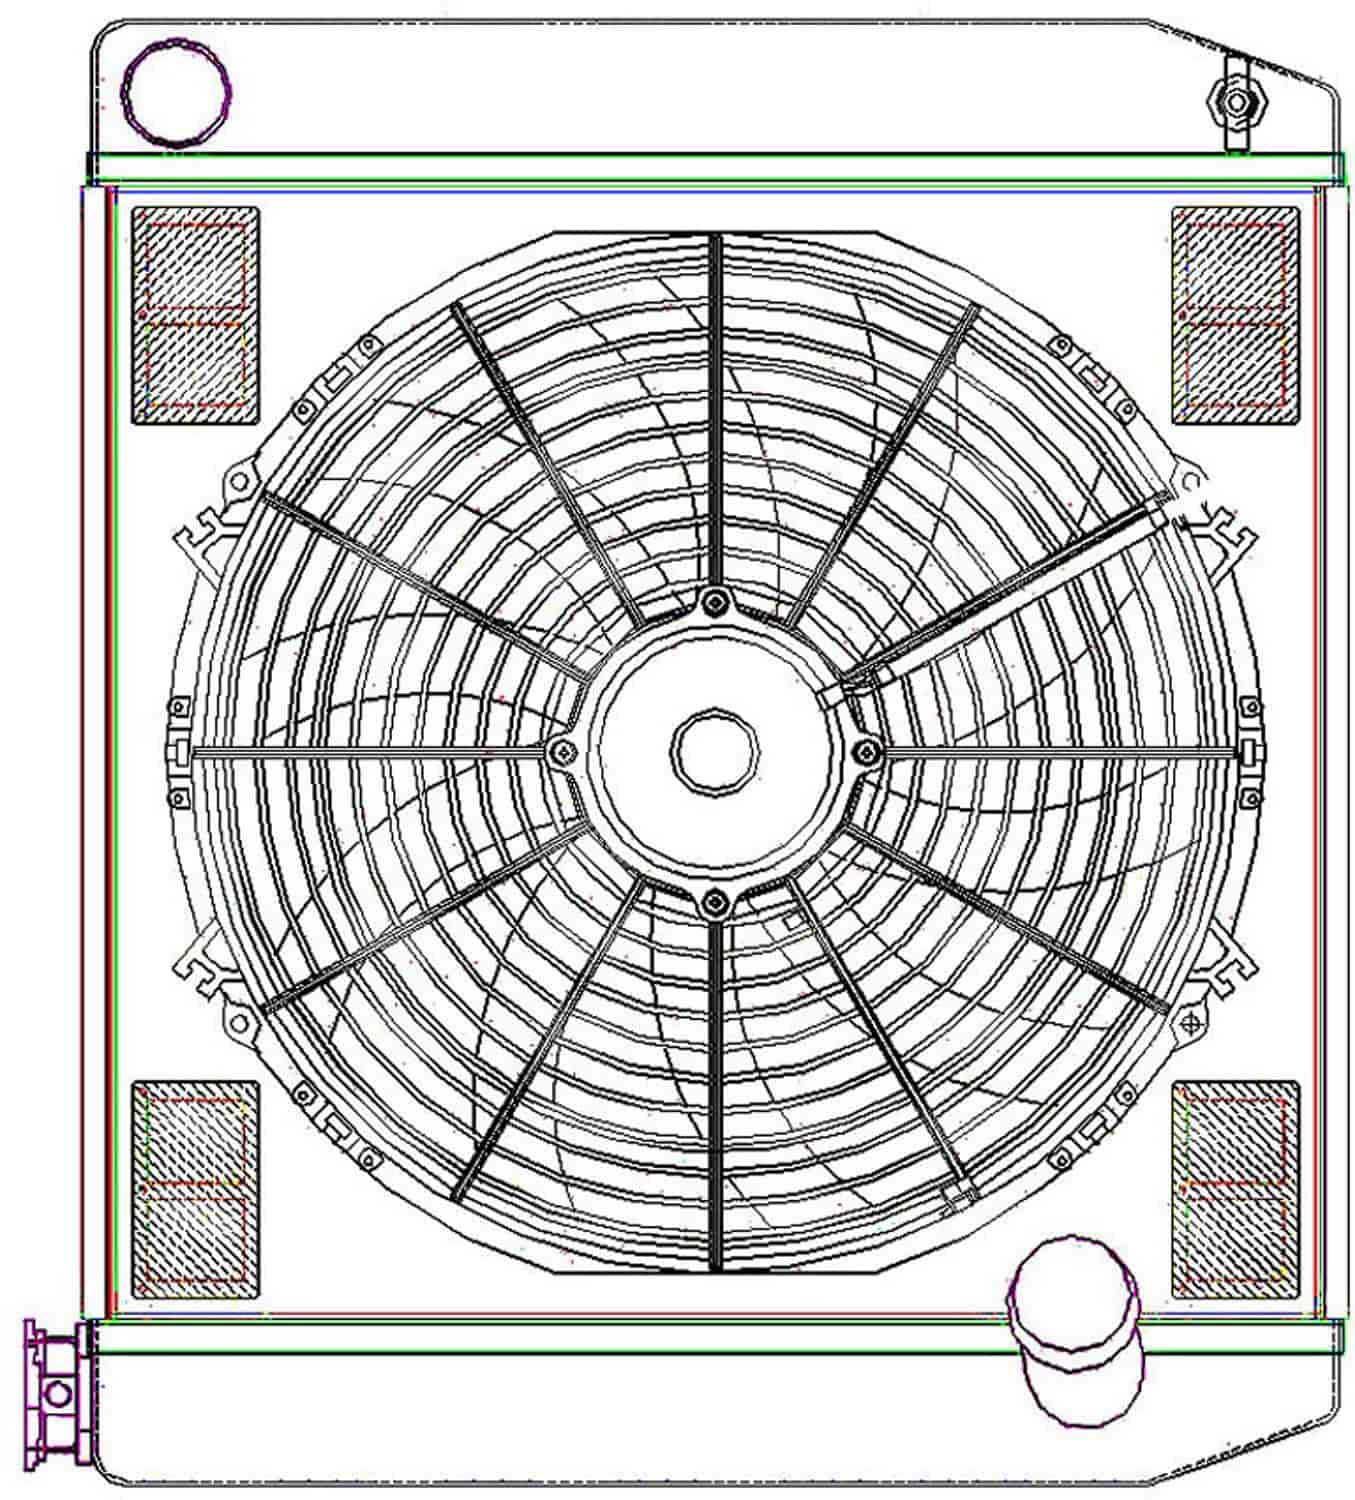 ClassicCool ComboUnit Universal Fit Radiator and Fan Single Pass Crossflow Design 22" x 19" with No Options